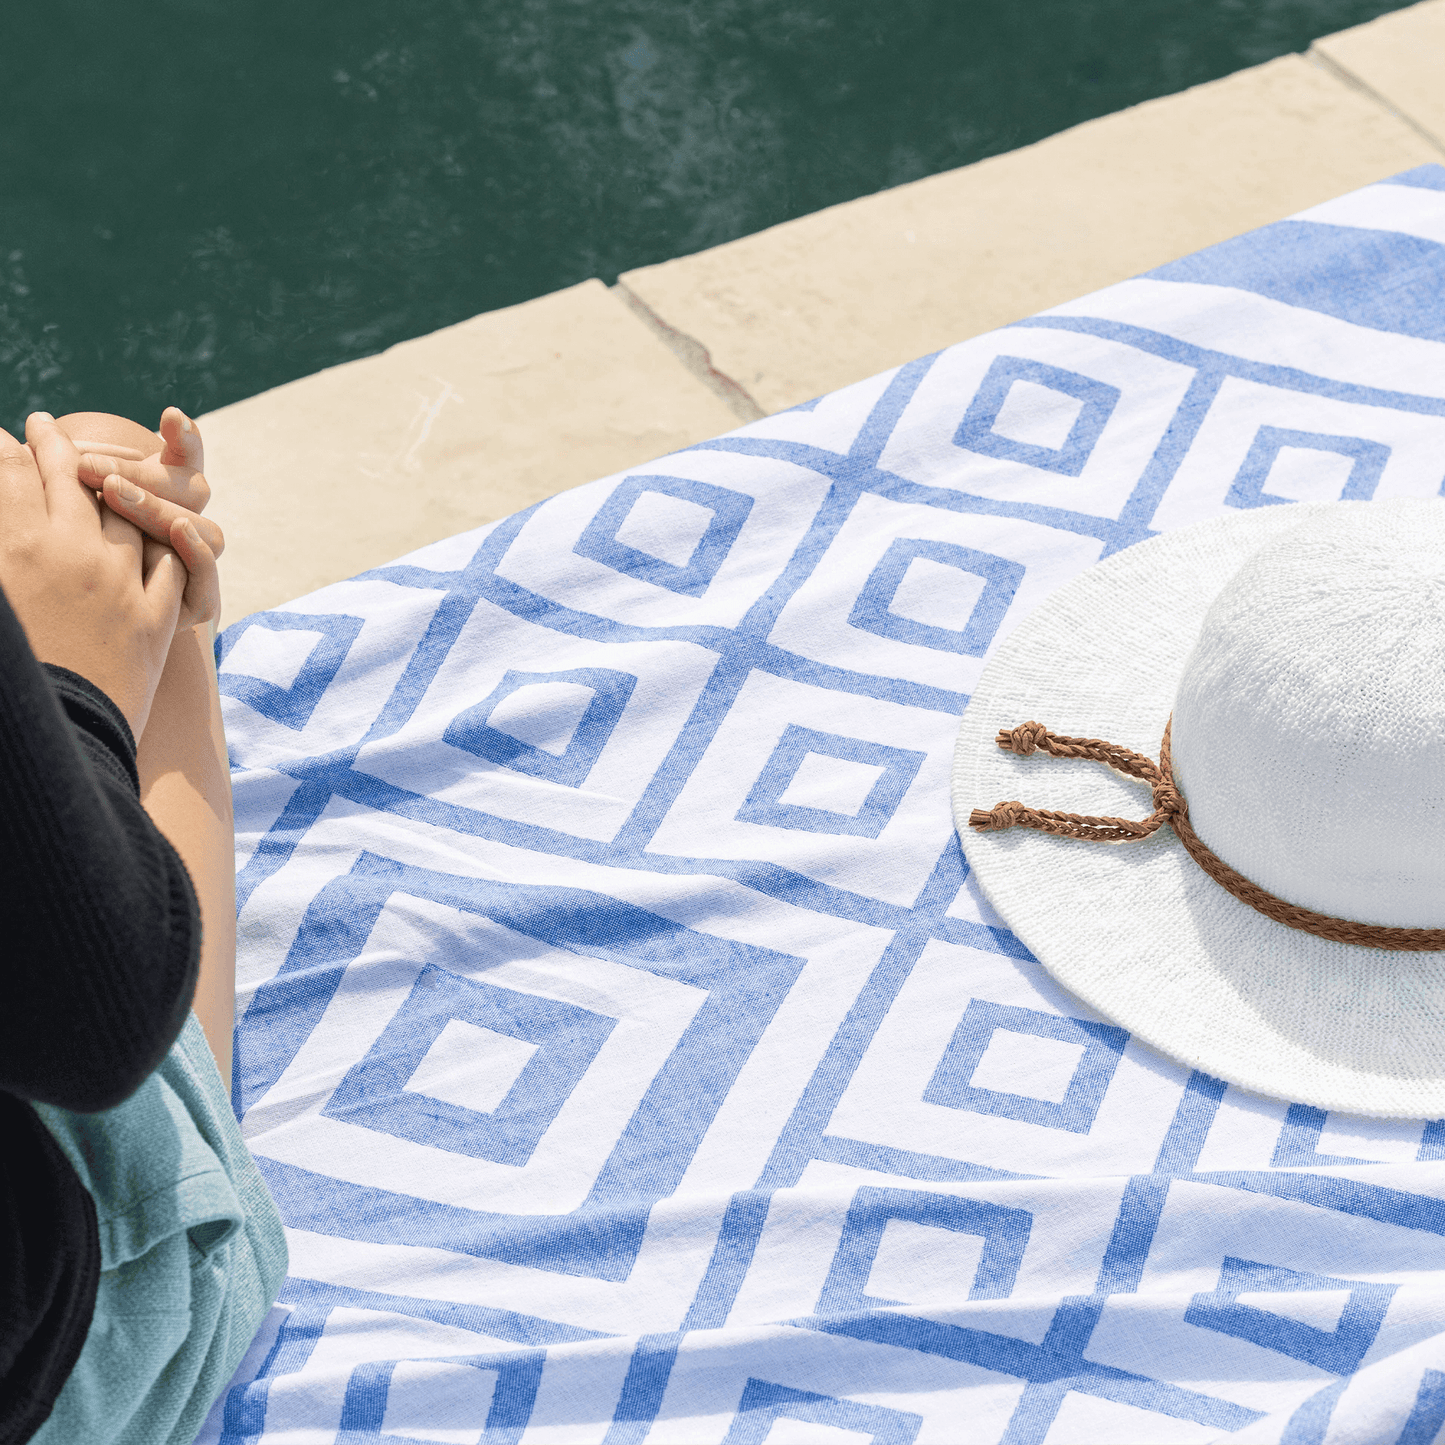 Person sits on a blue and white Turkish towel poolside with a white hat next to them